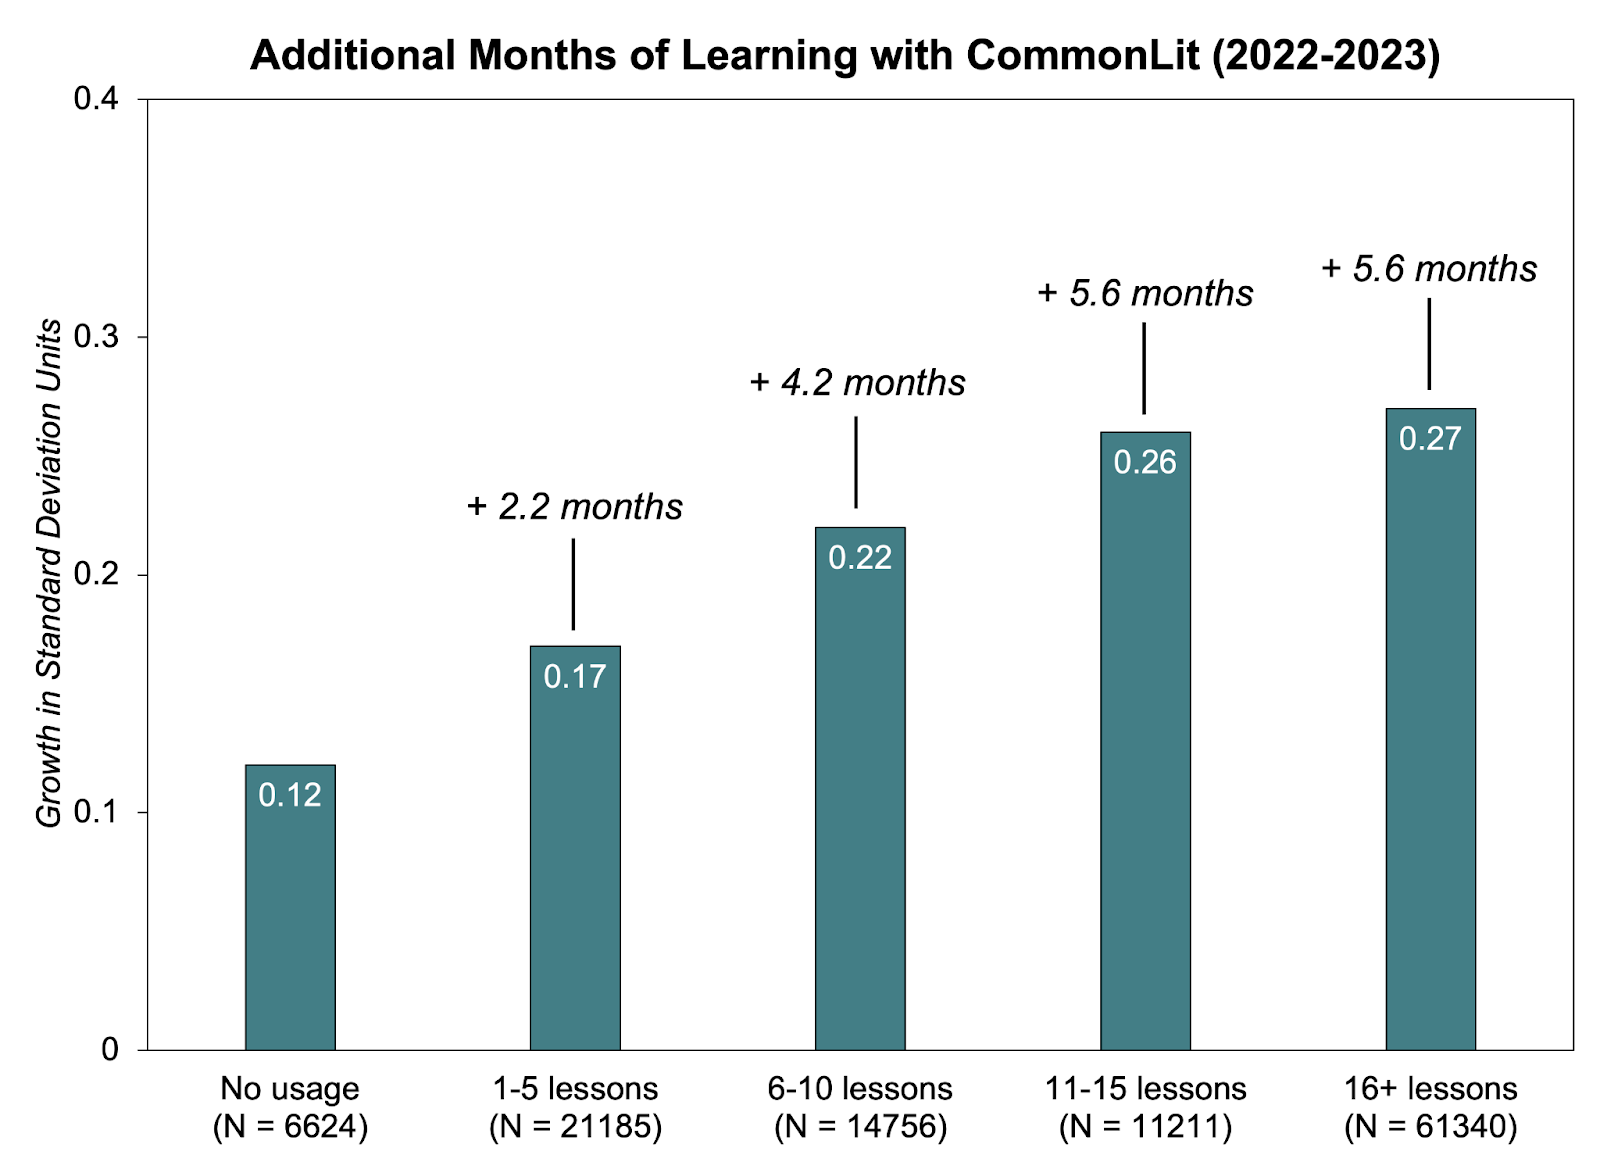 Students Using CommonLit Saw Significant Reading Gains of 2-6 Additional Months of Learning